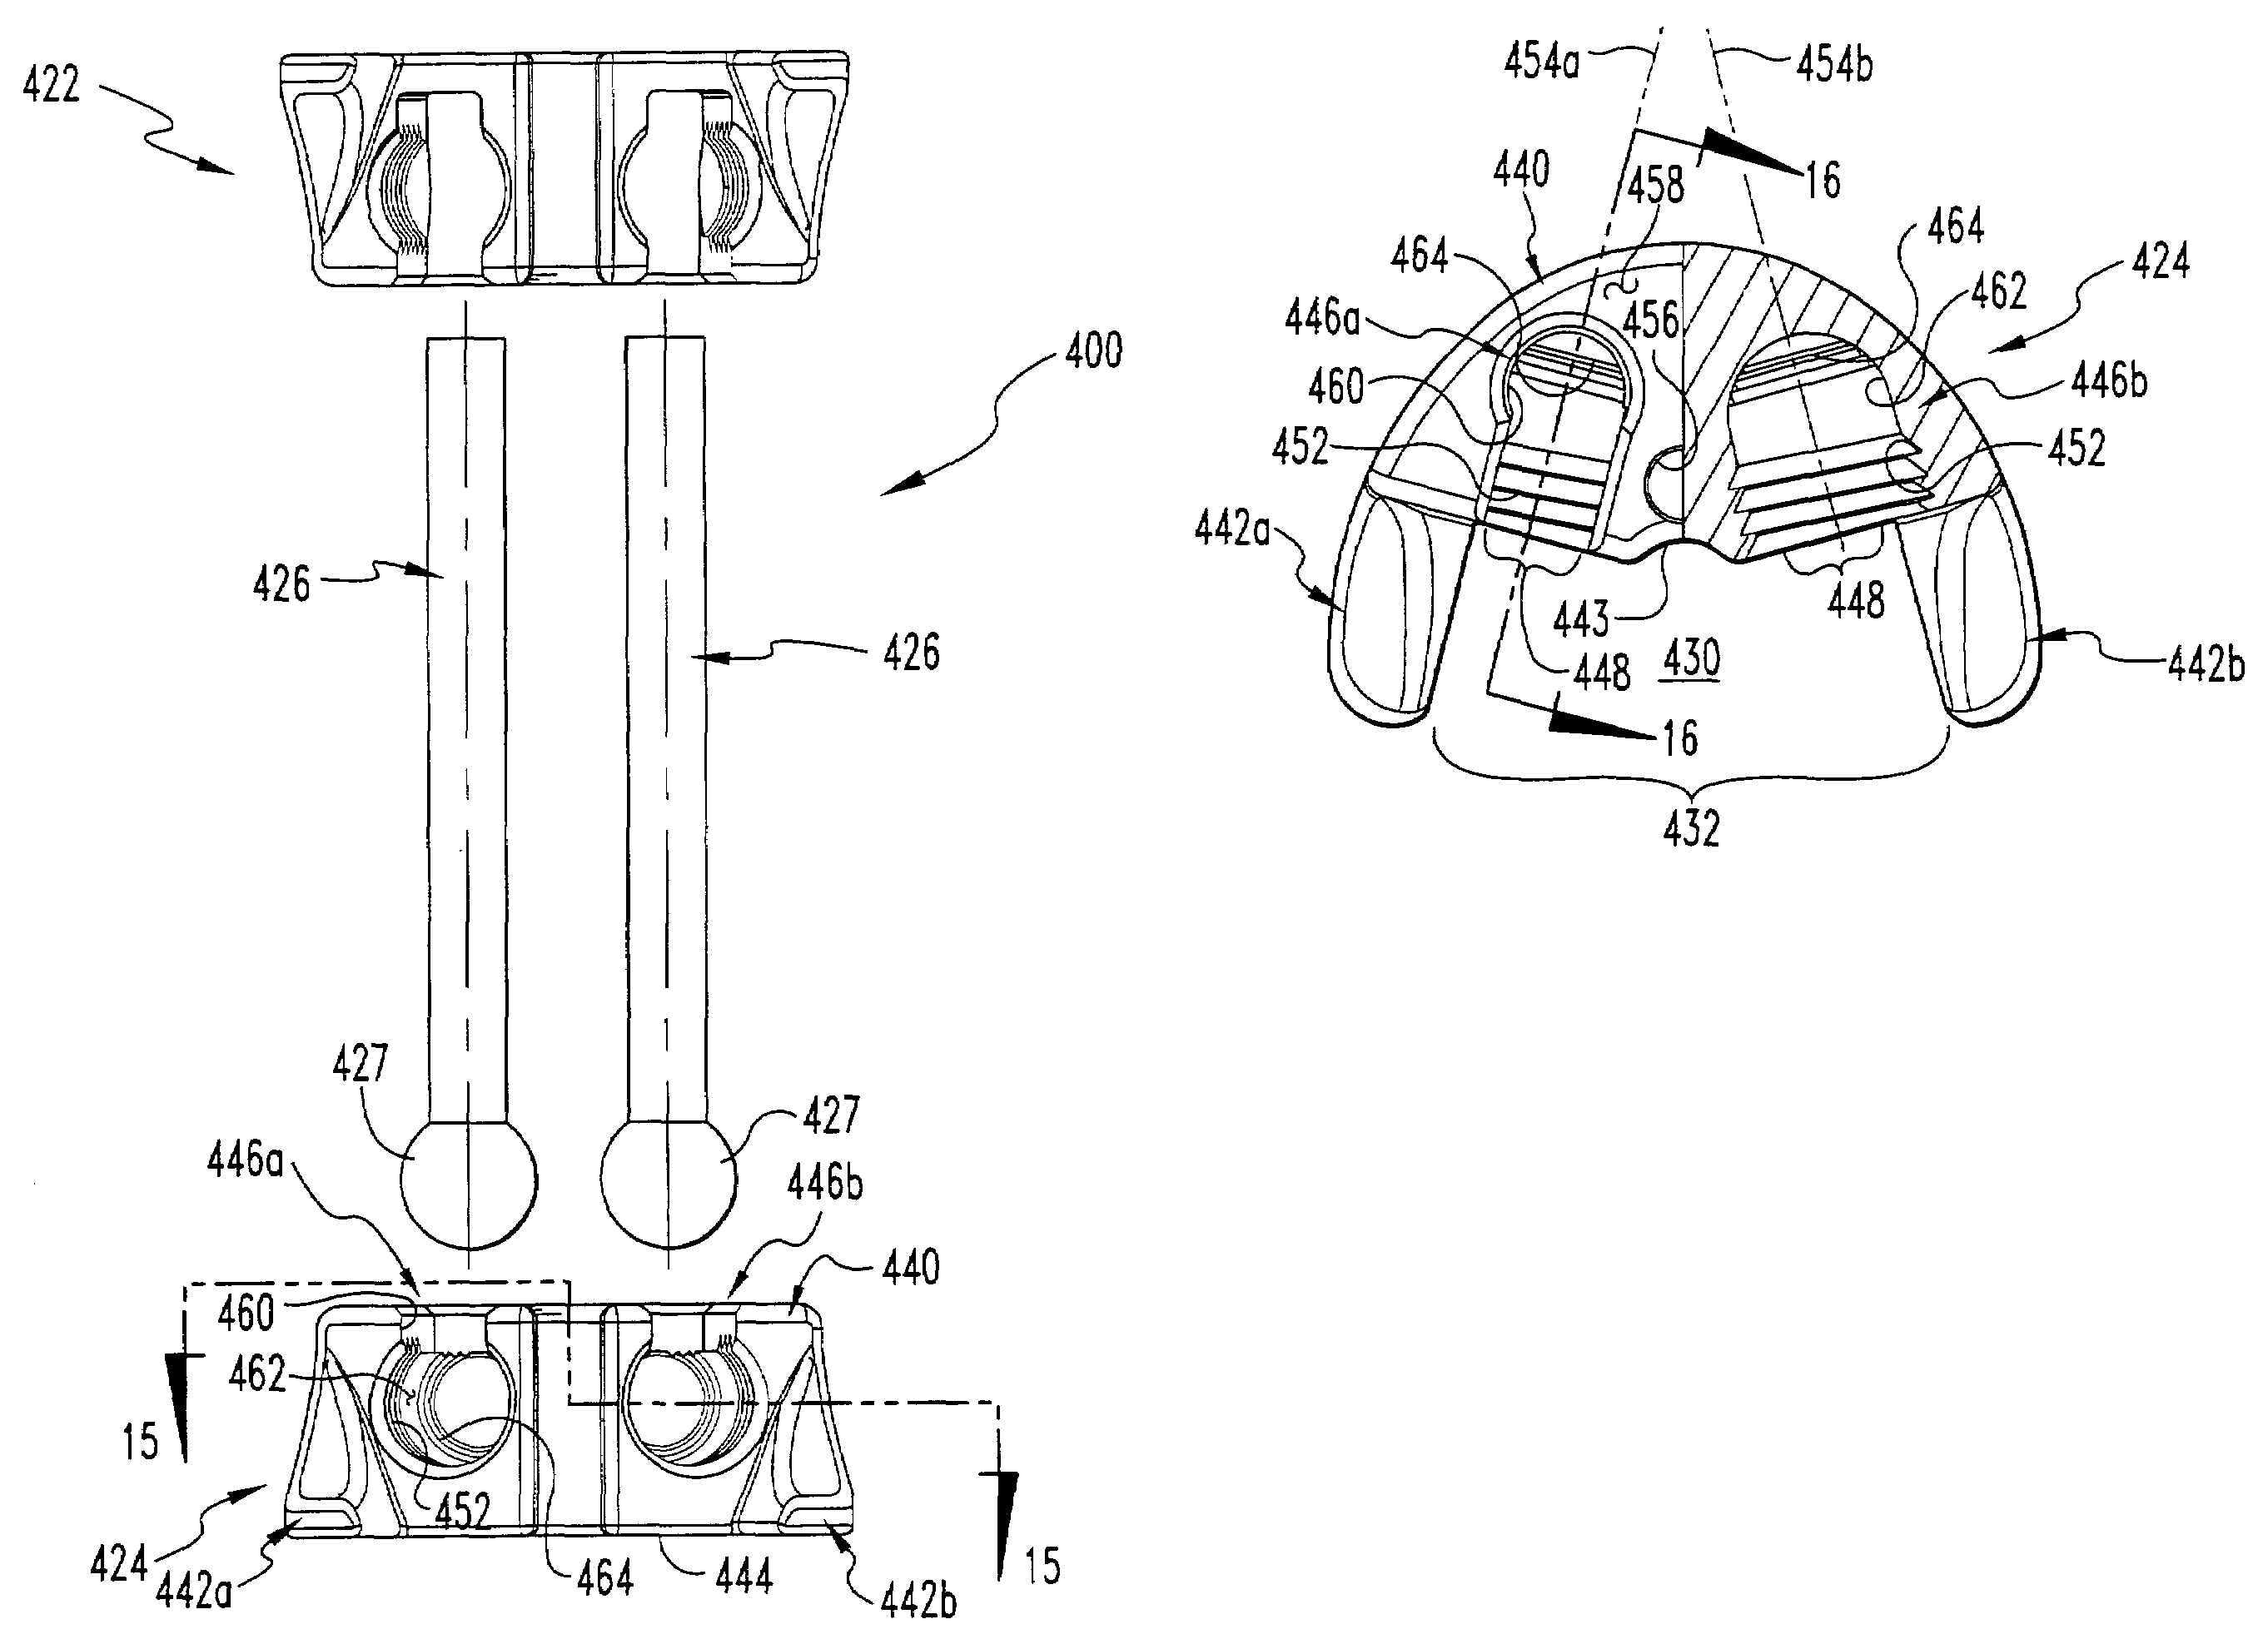 Apparatus and method for supporting vertebral bodies